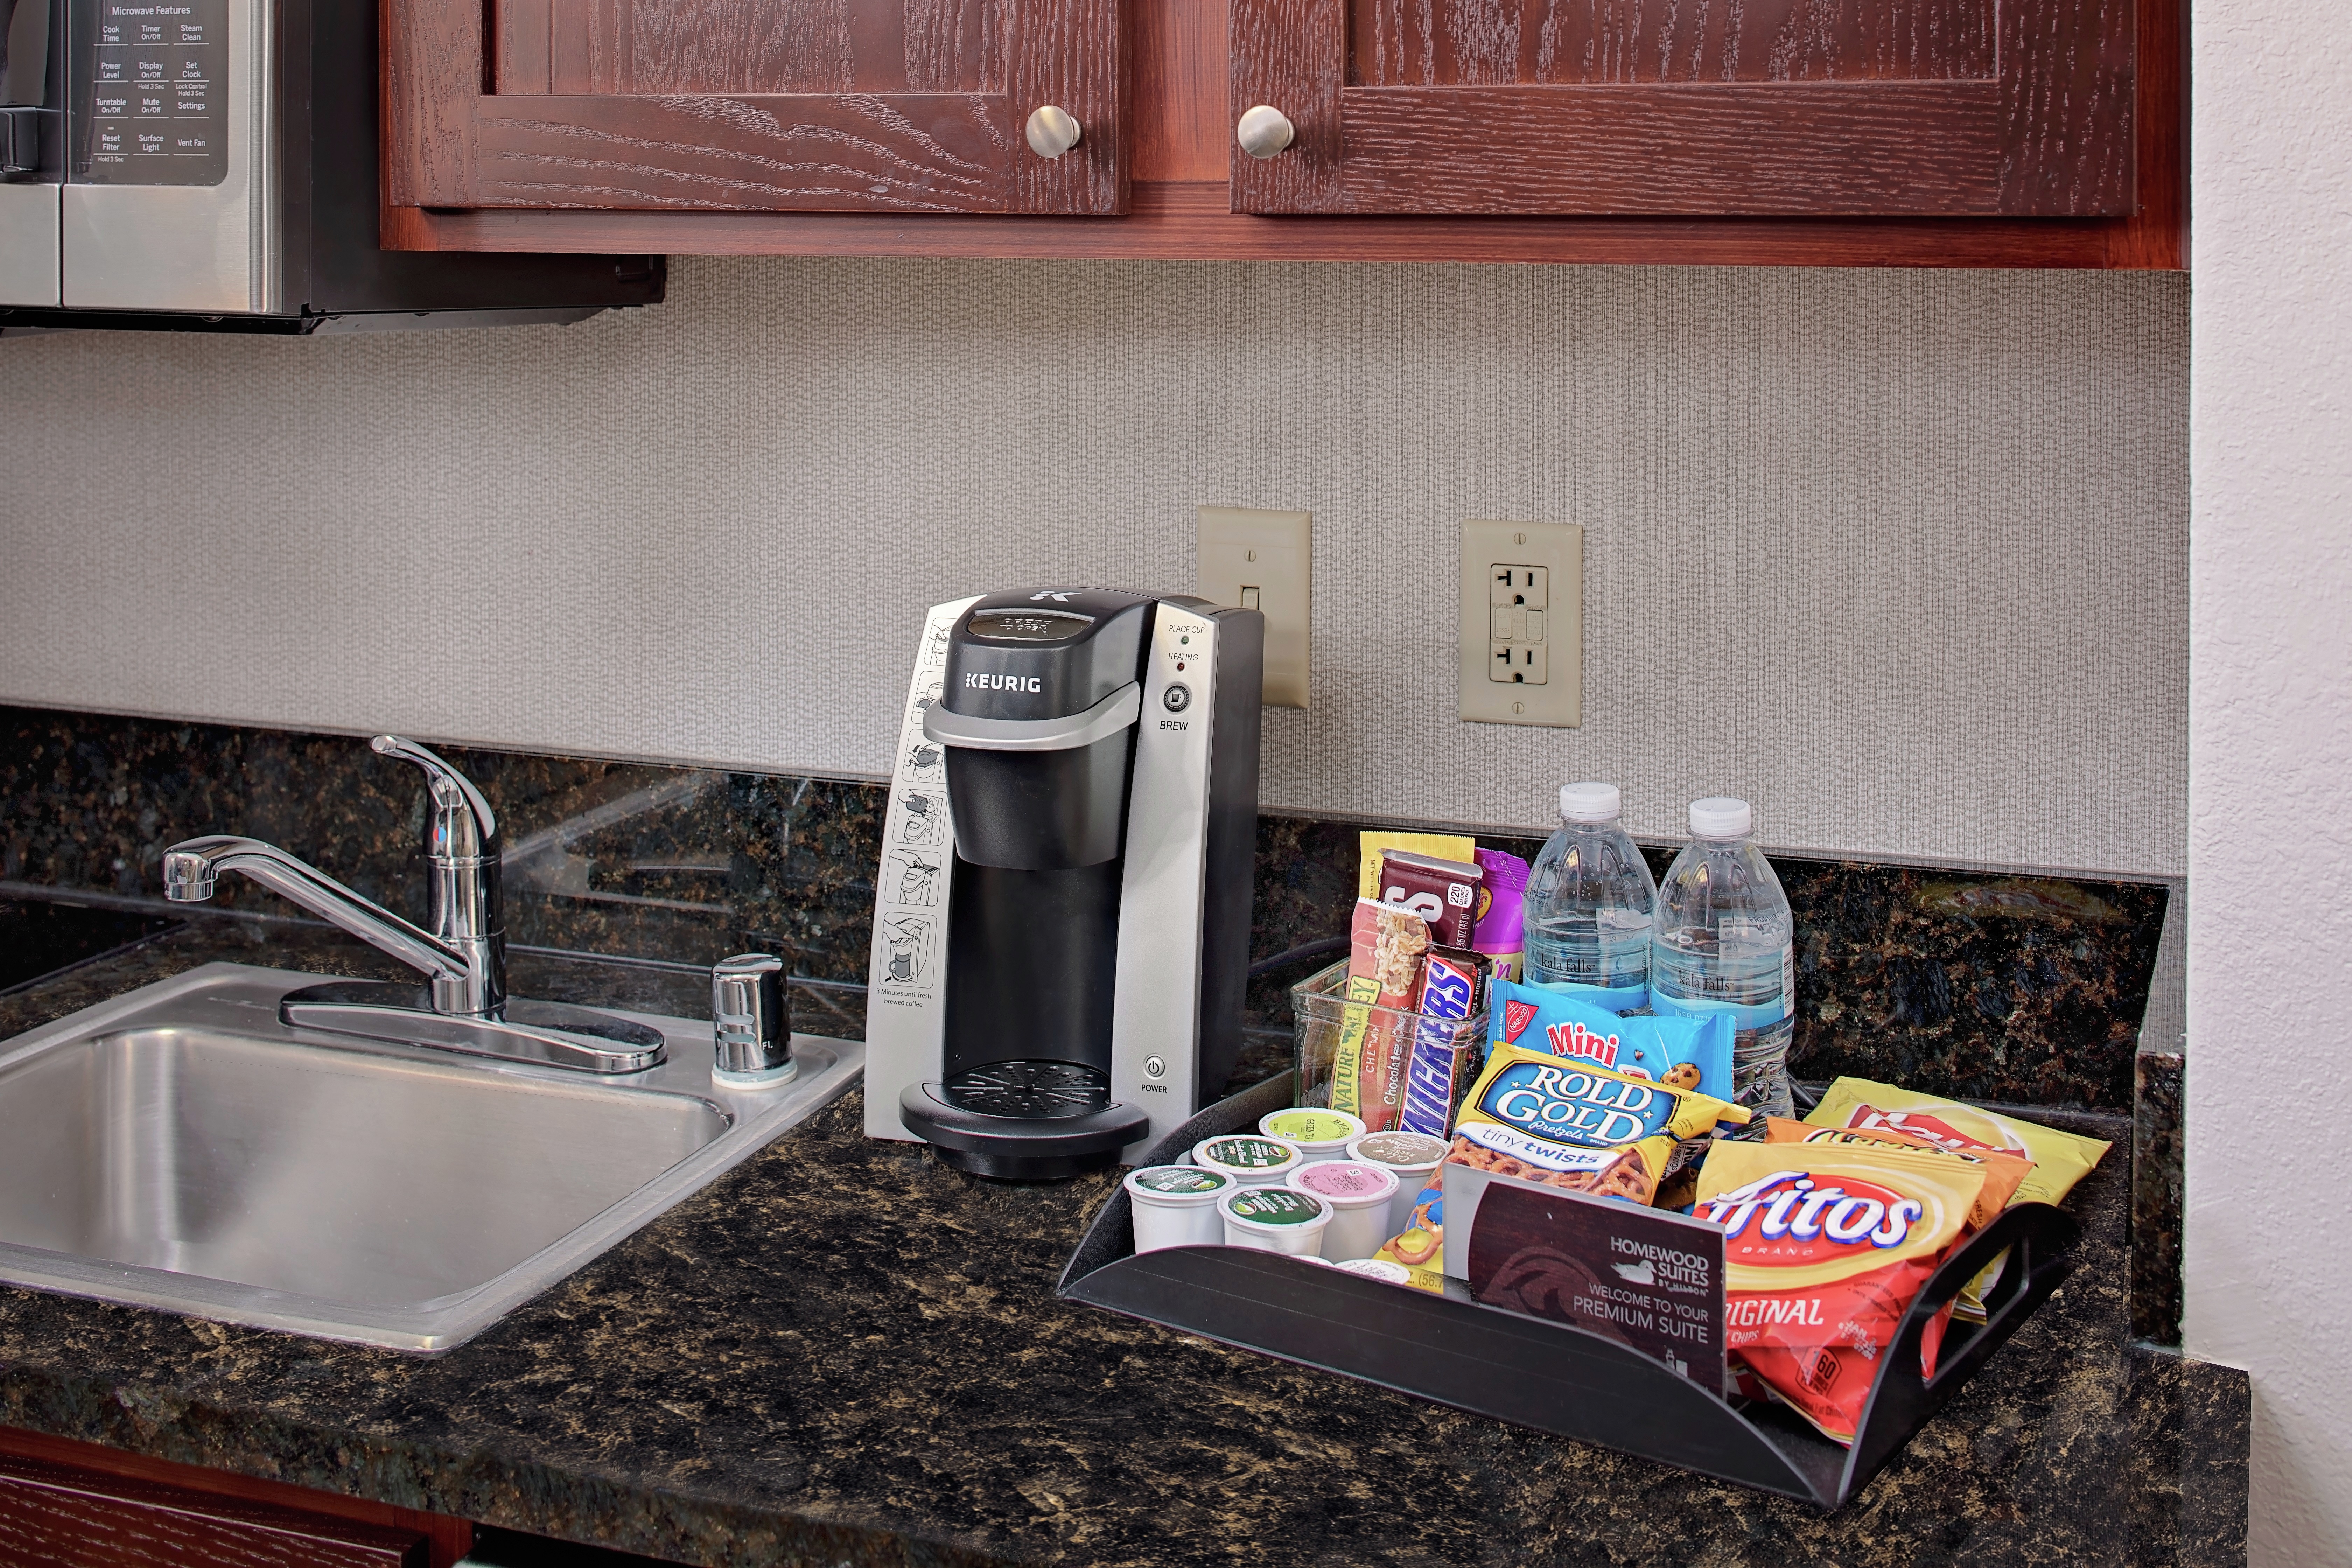 Snacks And Coffee Maker in a Hotel Room